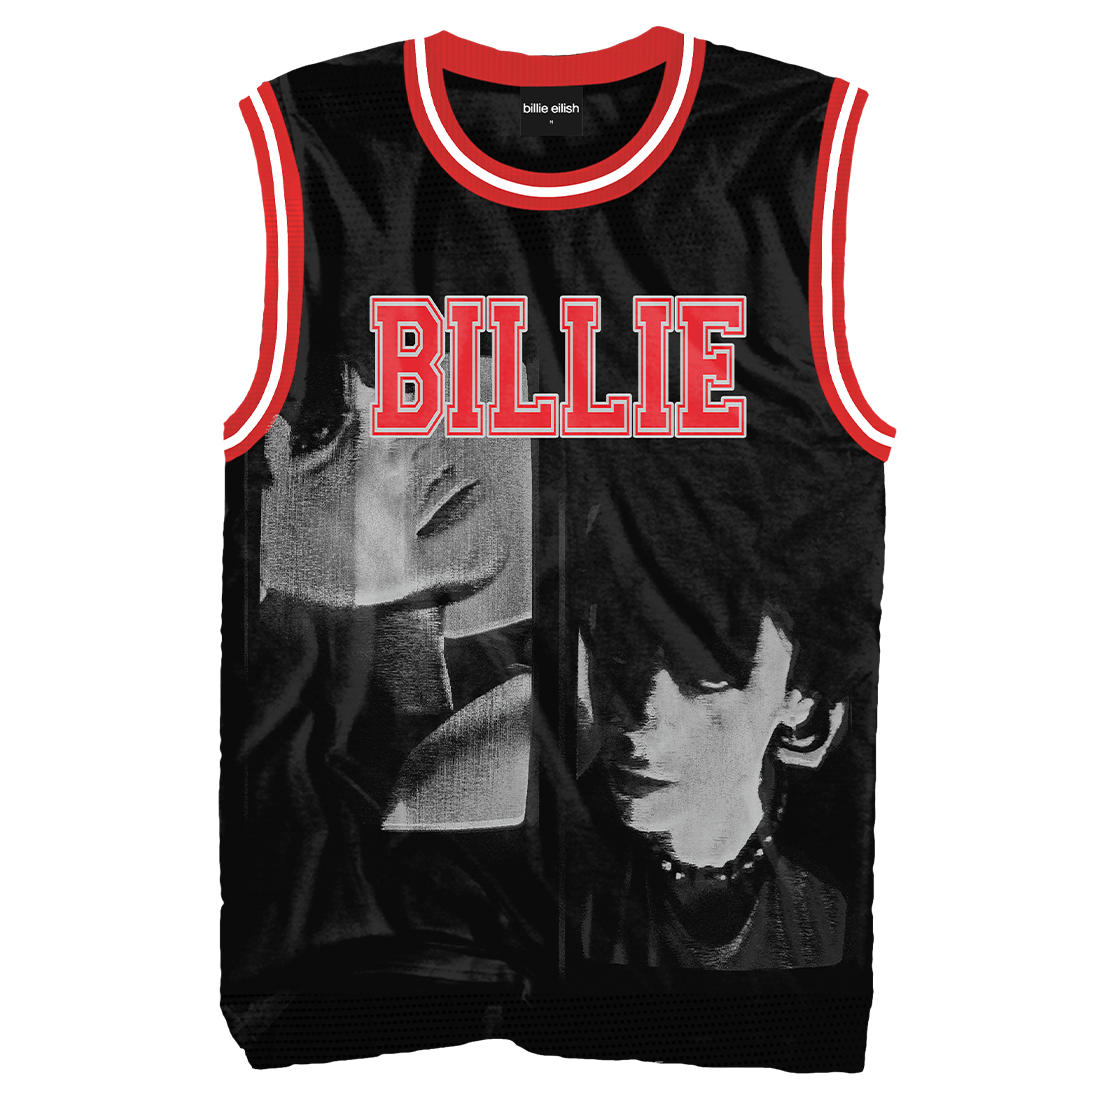 Billie Eilish Red and Black Outfit Jersey